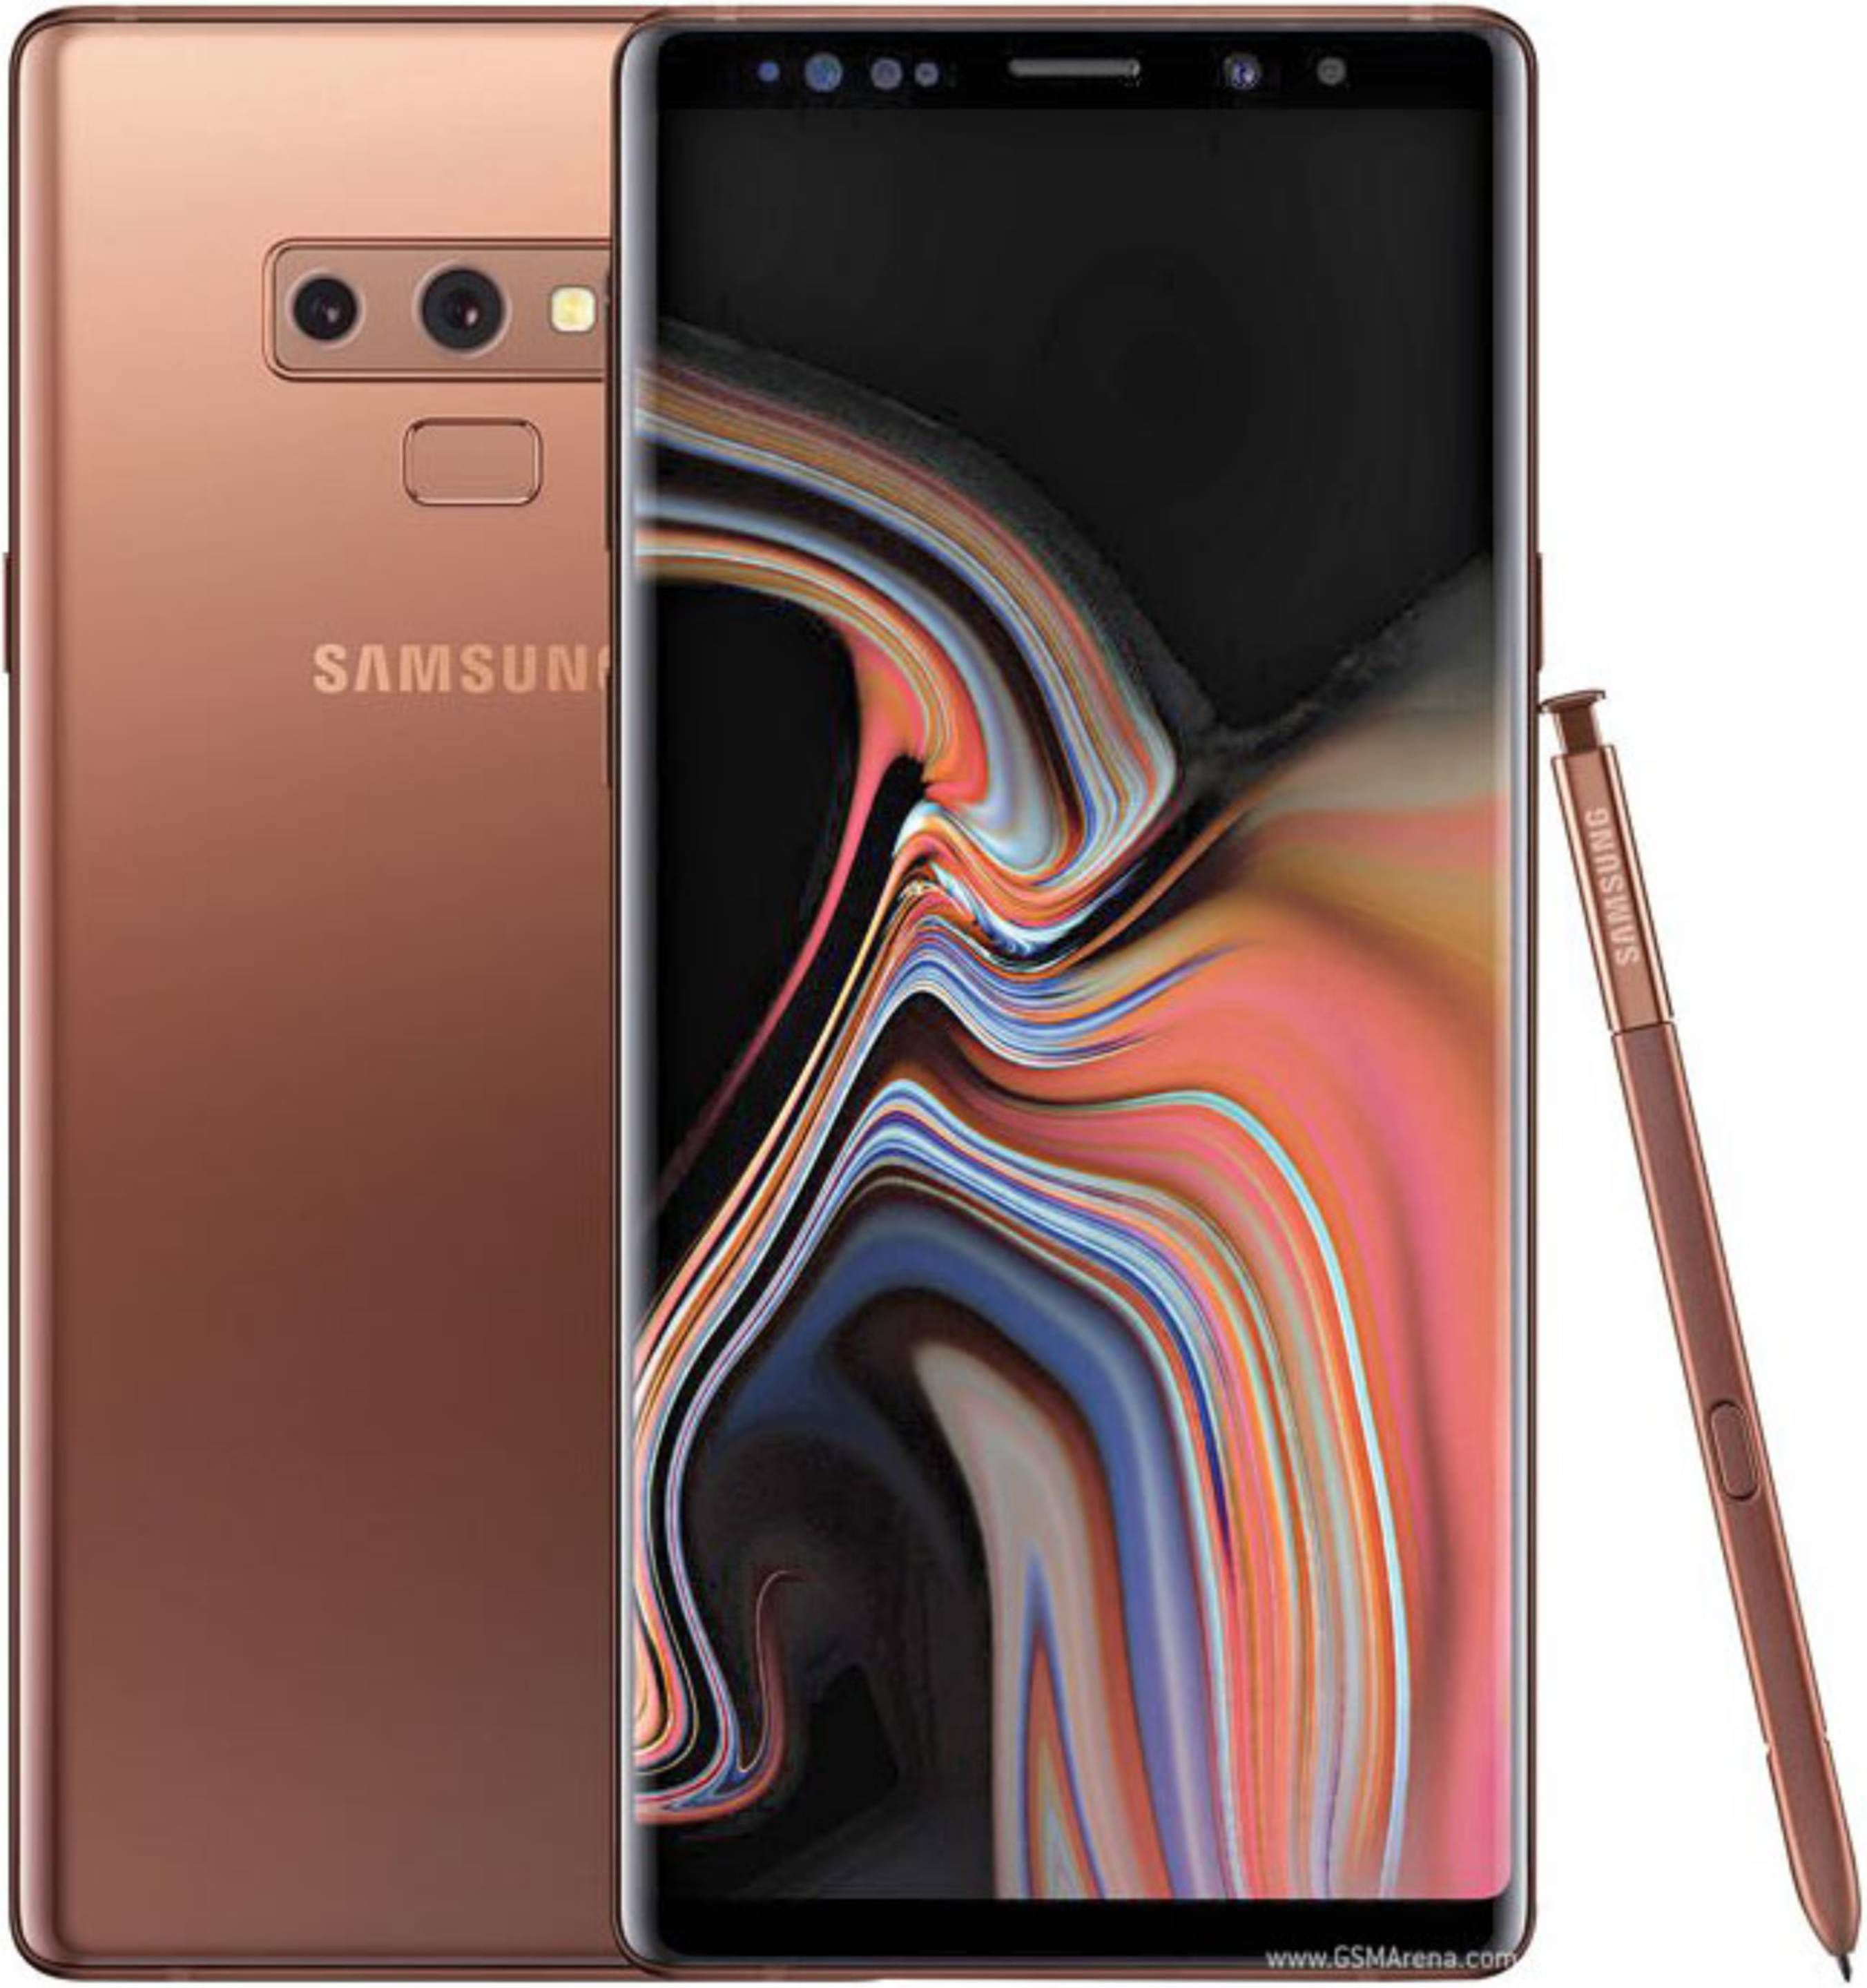 What is Samsung Galaxy Note 9 Screen Replacement Cost in Nairobi?